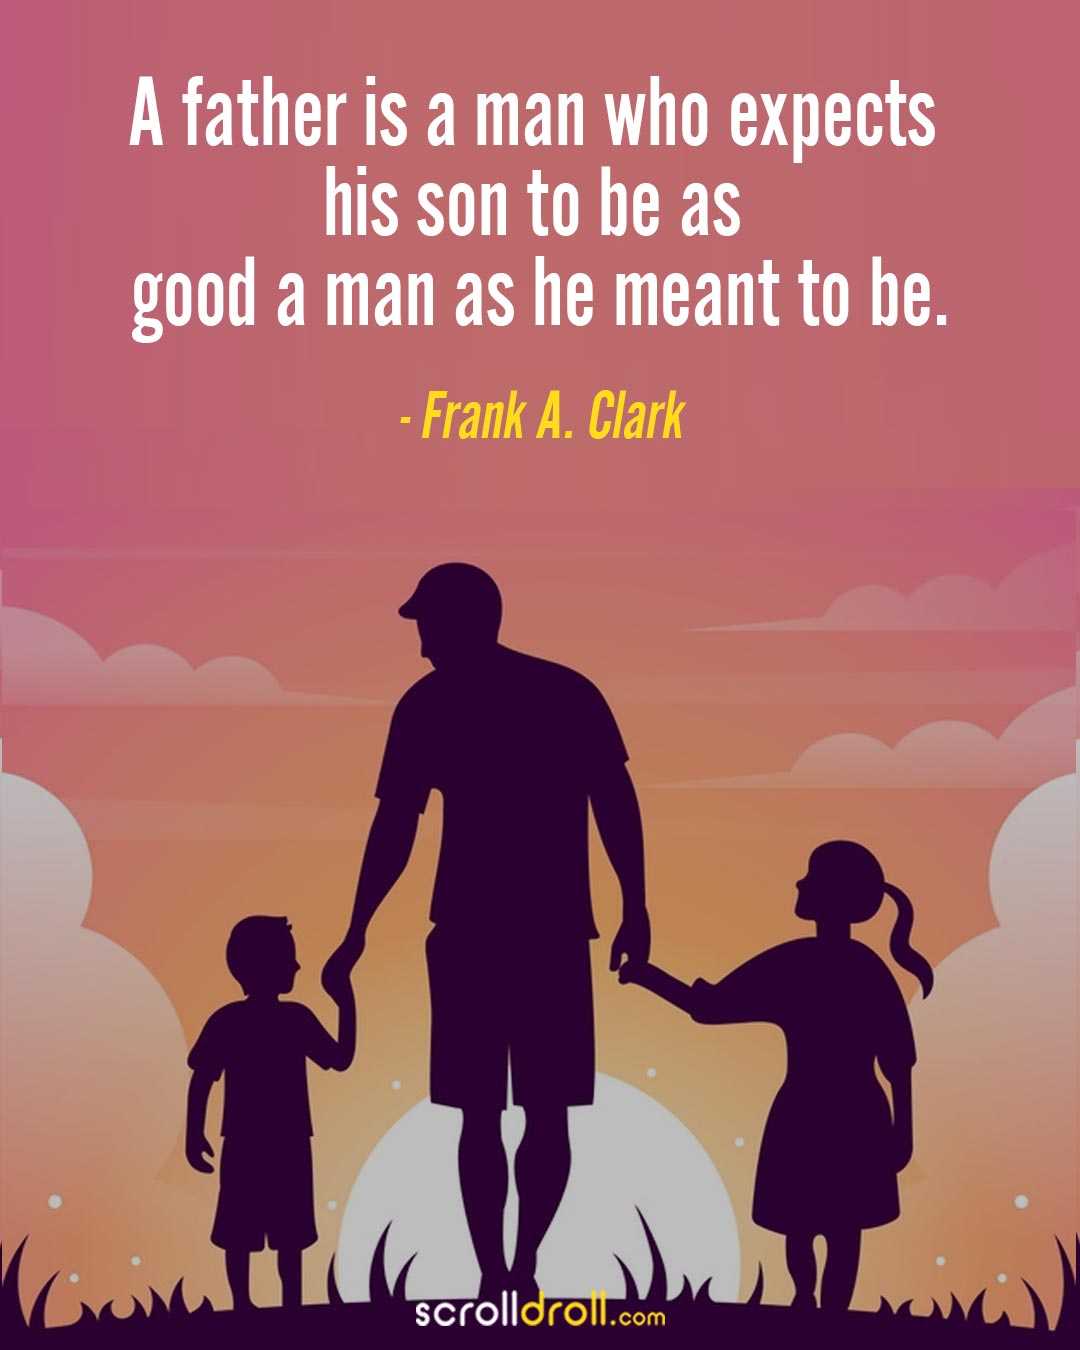 These 20 Dad Quotes Will Warm Your Heart This Father's Day!